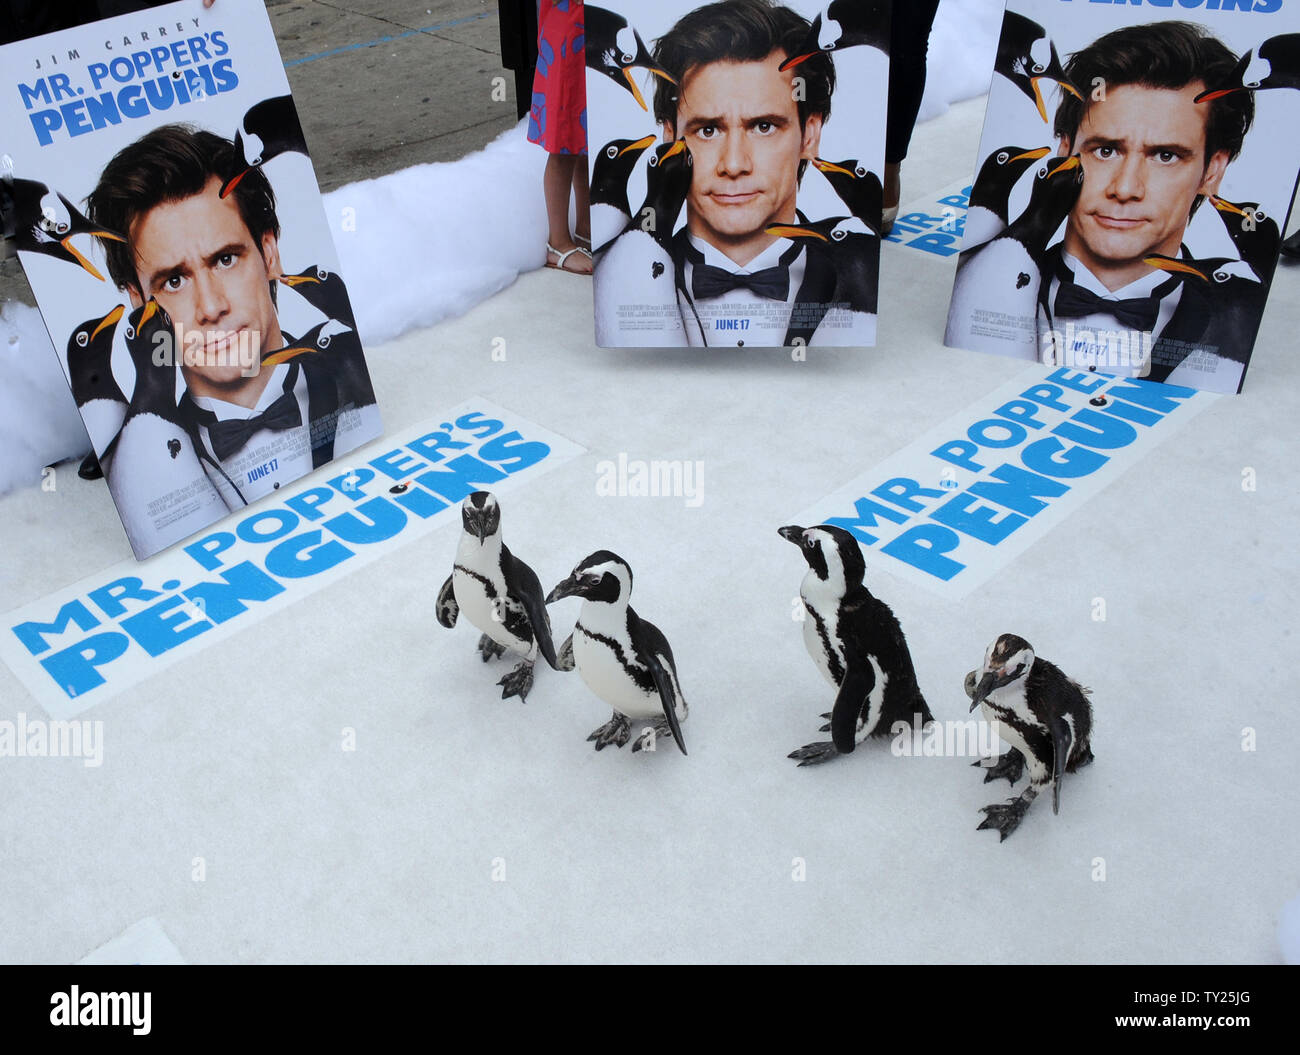 Penguins walk the carpet during premiere of the motion picture comedy 'Mr. Popper's Penguins', at Grauman's Chinese Theatre in the Hollywood section of Los Angeles on June 12, 2011.   UPI/Jim Ruymen Stock Photo